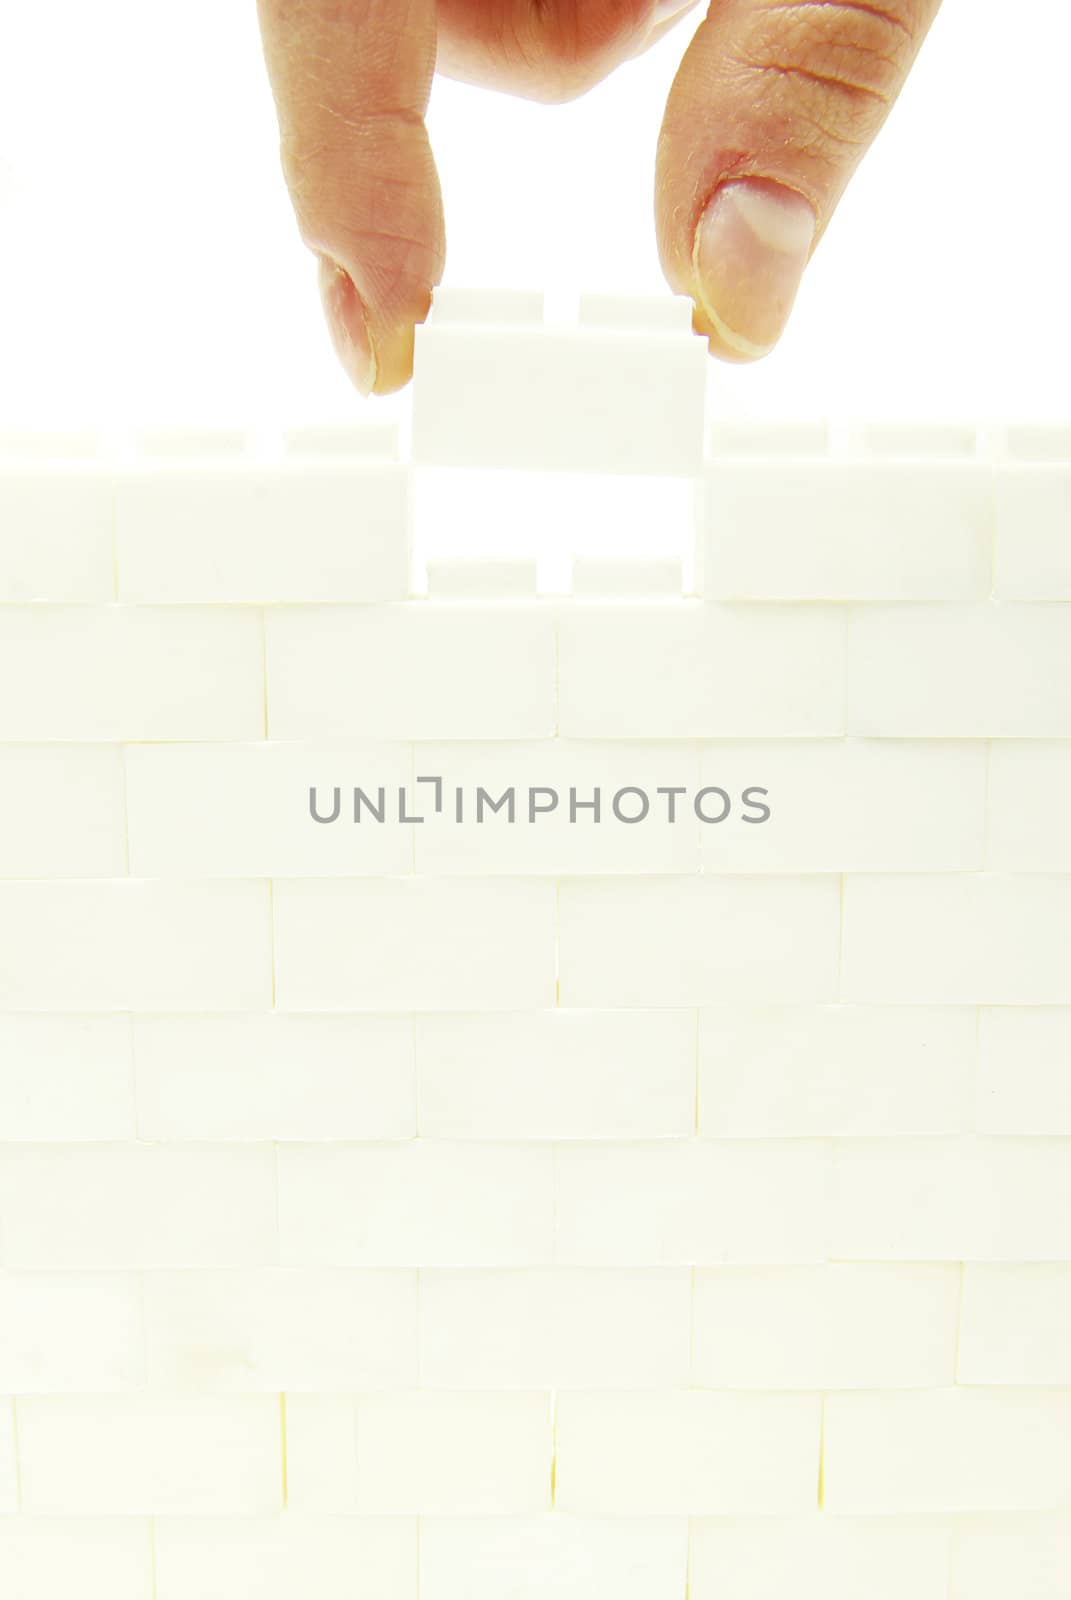 compleeting the wall on a white background